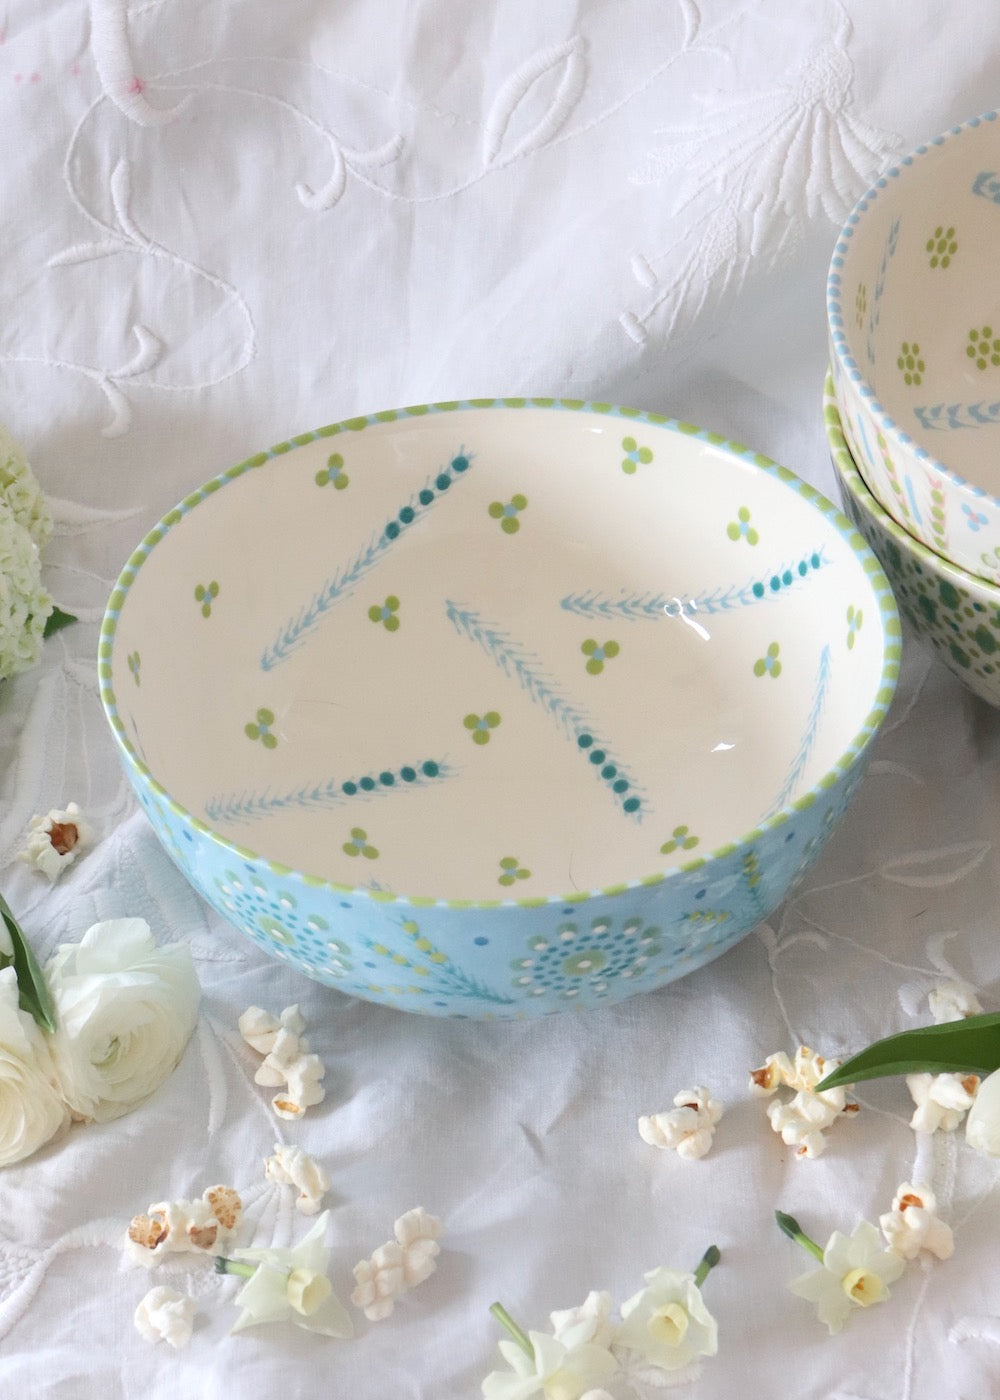 Fruit Bowl - Pale Blue with White Daisy